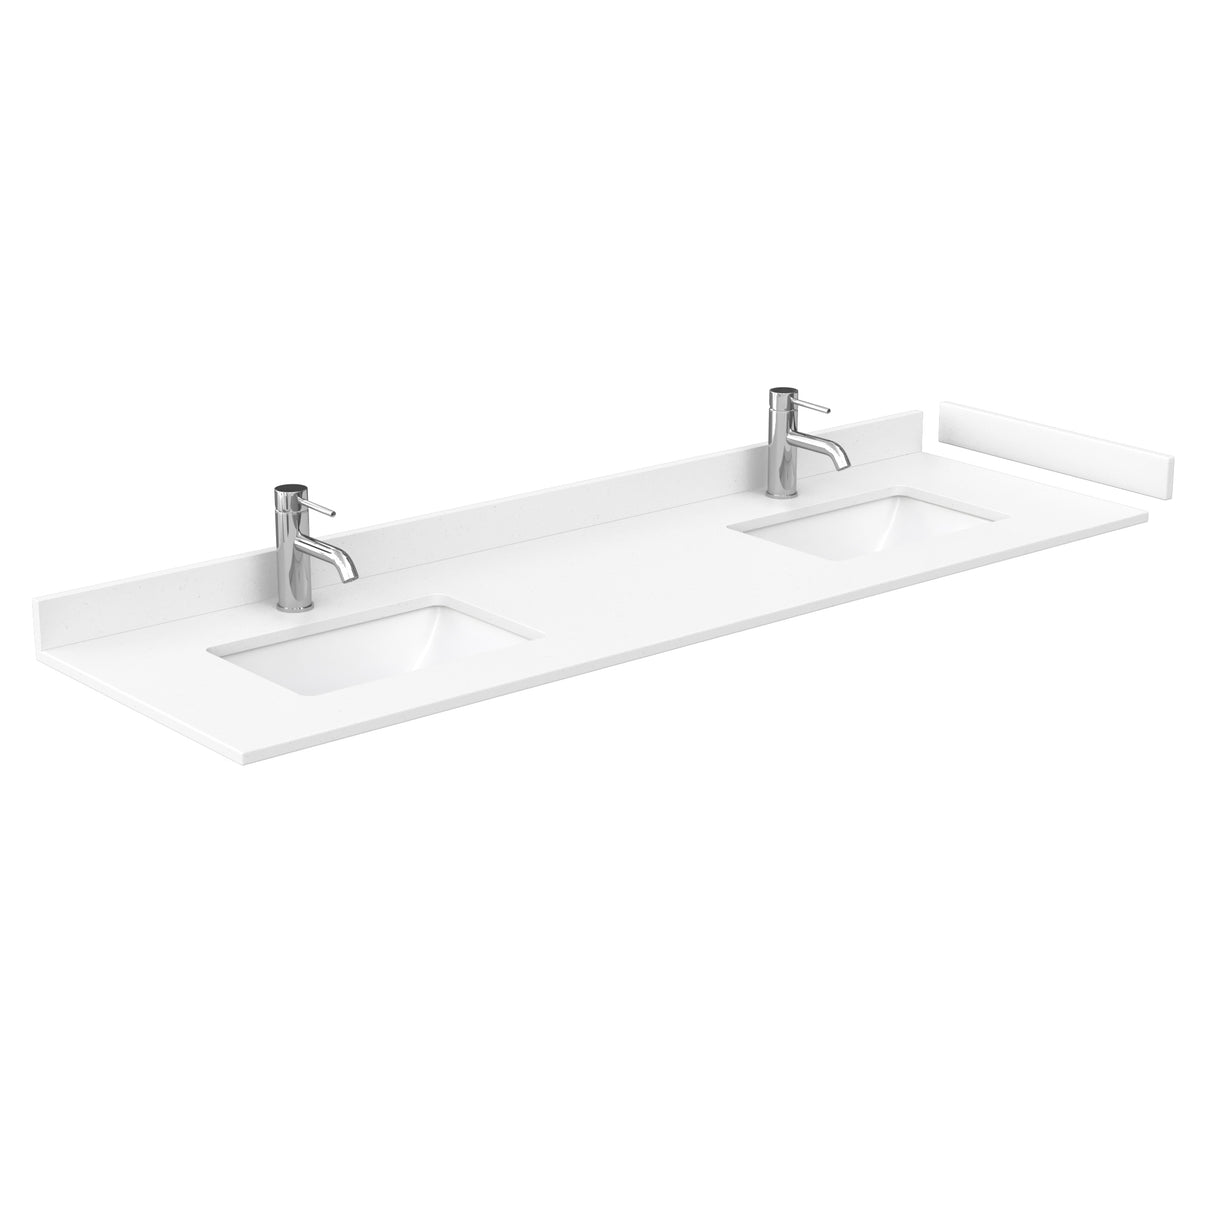 Daria 72 Inch Double Bathroom Vanity in White White Cultured Marble Countertop Undermount Square Sinks 24 Inch Mirrors